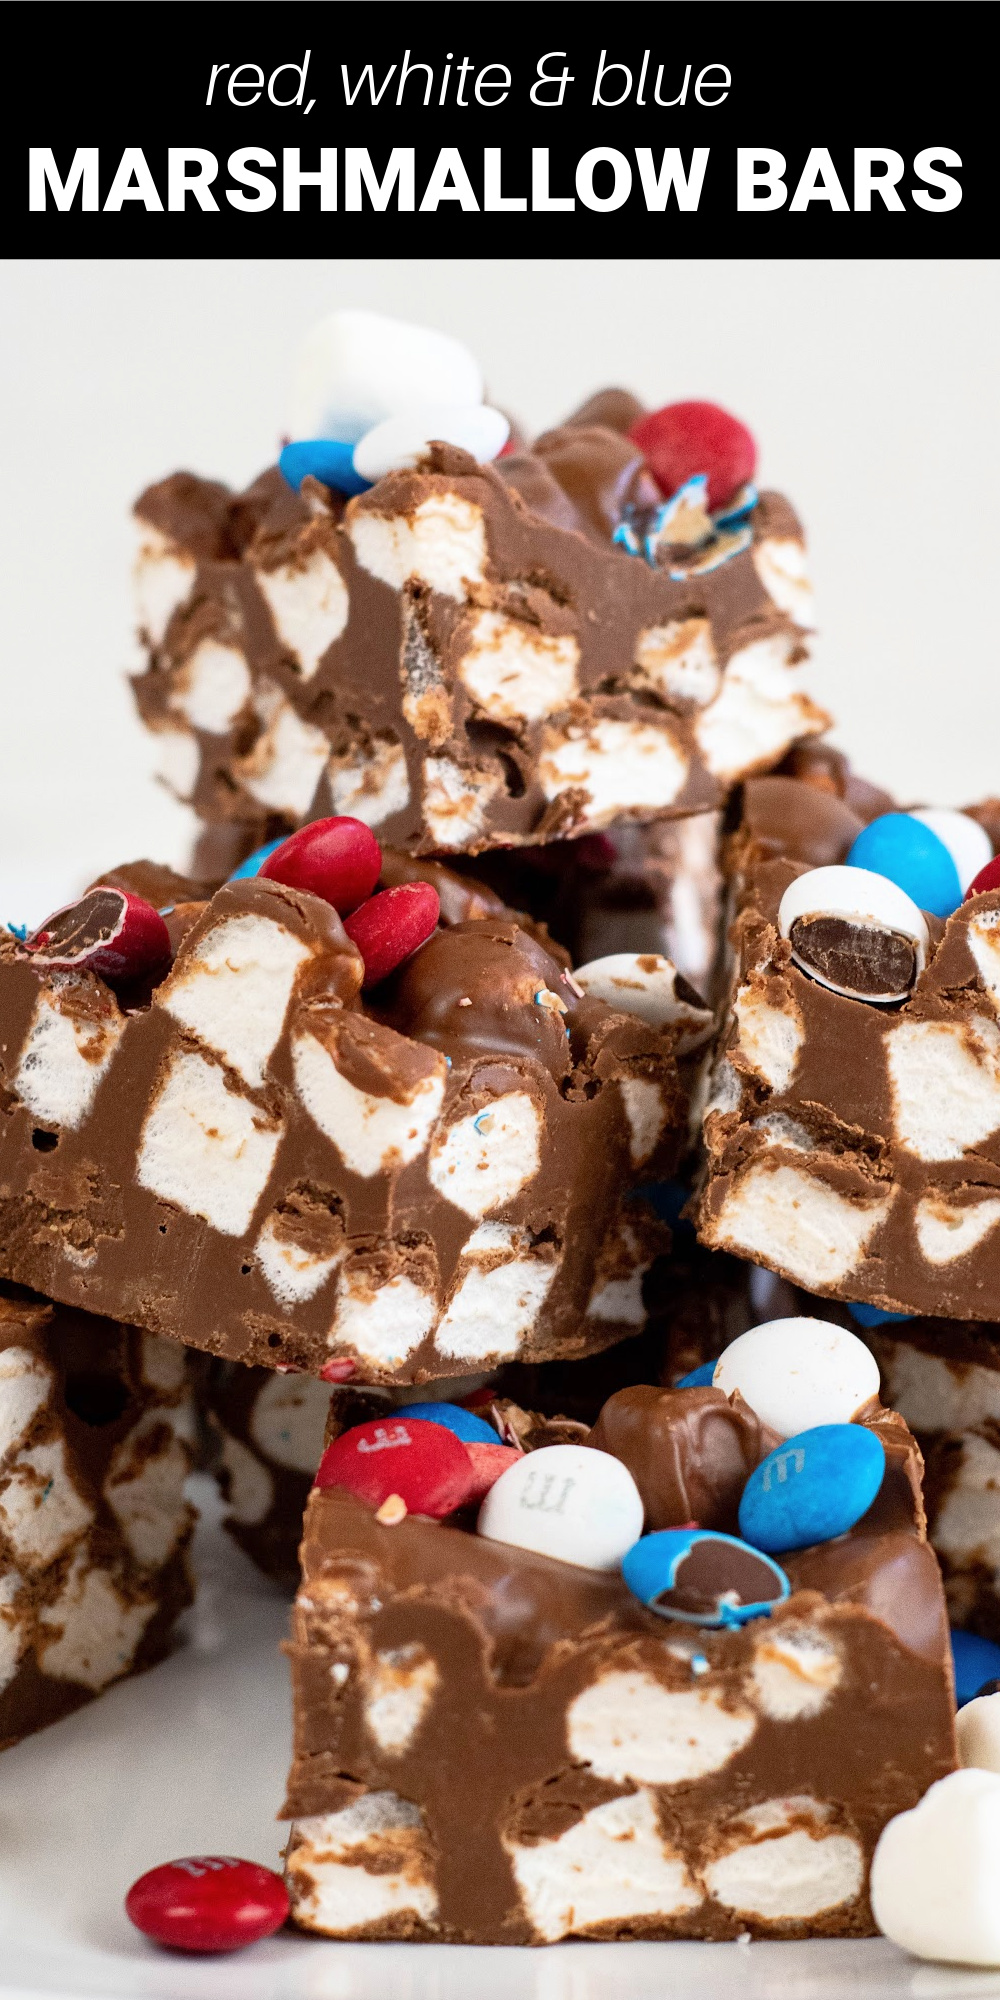 Truly one of the tastiest and most patriotic desserts, these Red White and Blue Chocolate Marshmallow Bars only take five simple ingredients and five minutes prep time! They'll make a fun and festive addition to your dessert table during your Memorial Day, Fourth of July and Labor Day celebrations!